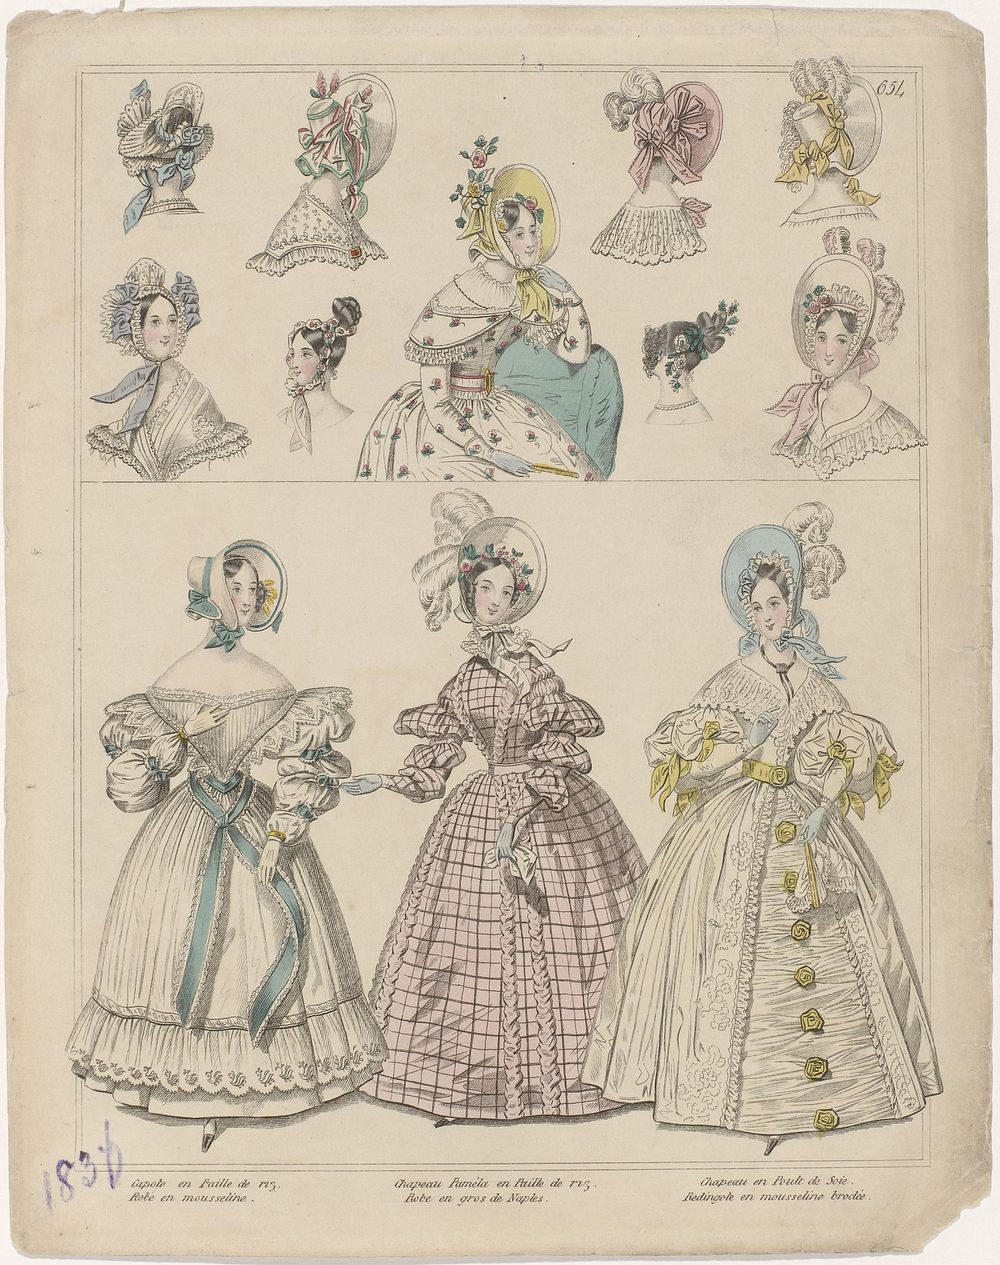 Townsend's Monthly Selection of Parisian Costumes, 1836, nr. 654 : Capote en Paille de riz (...) (1836) by anonymous and…